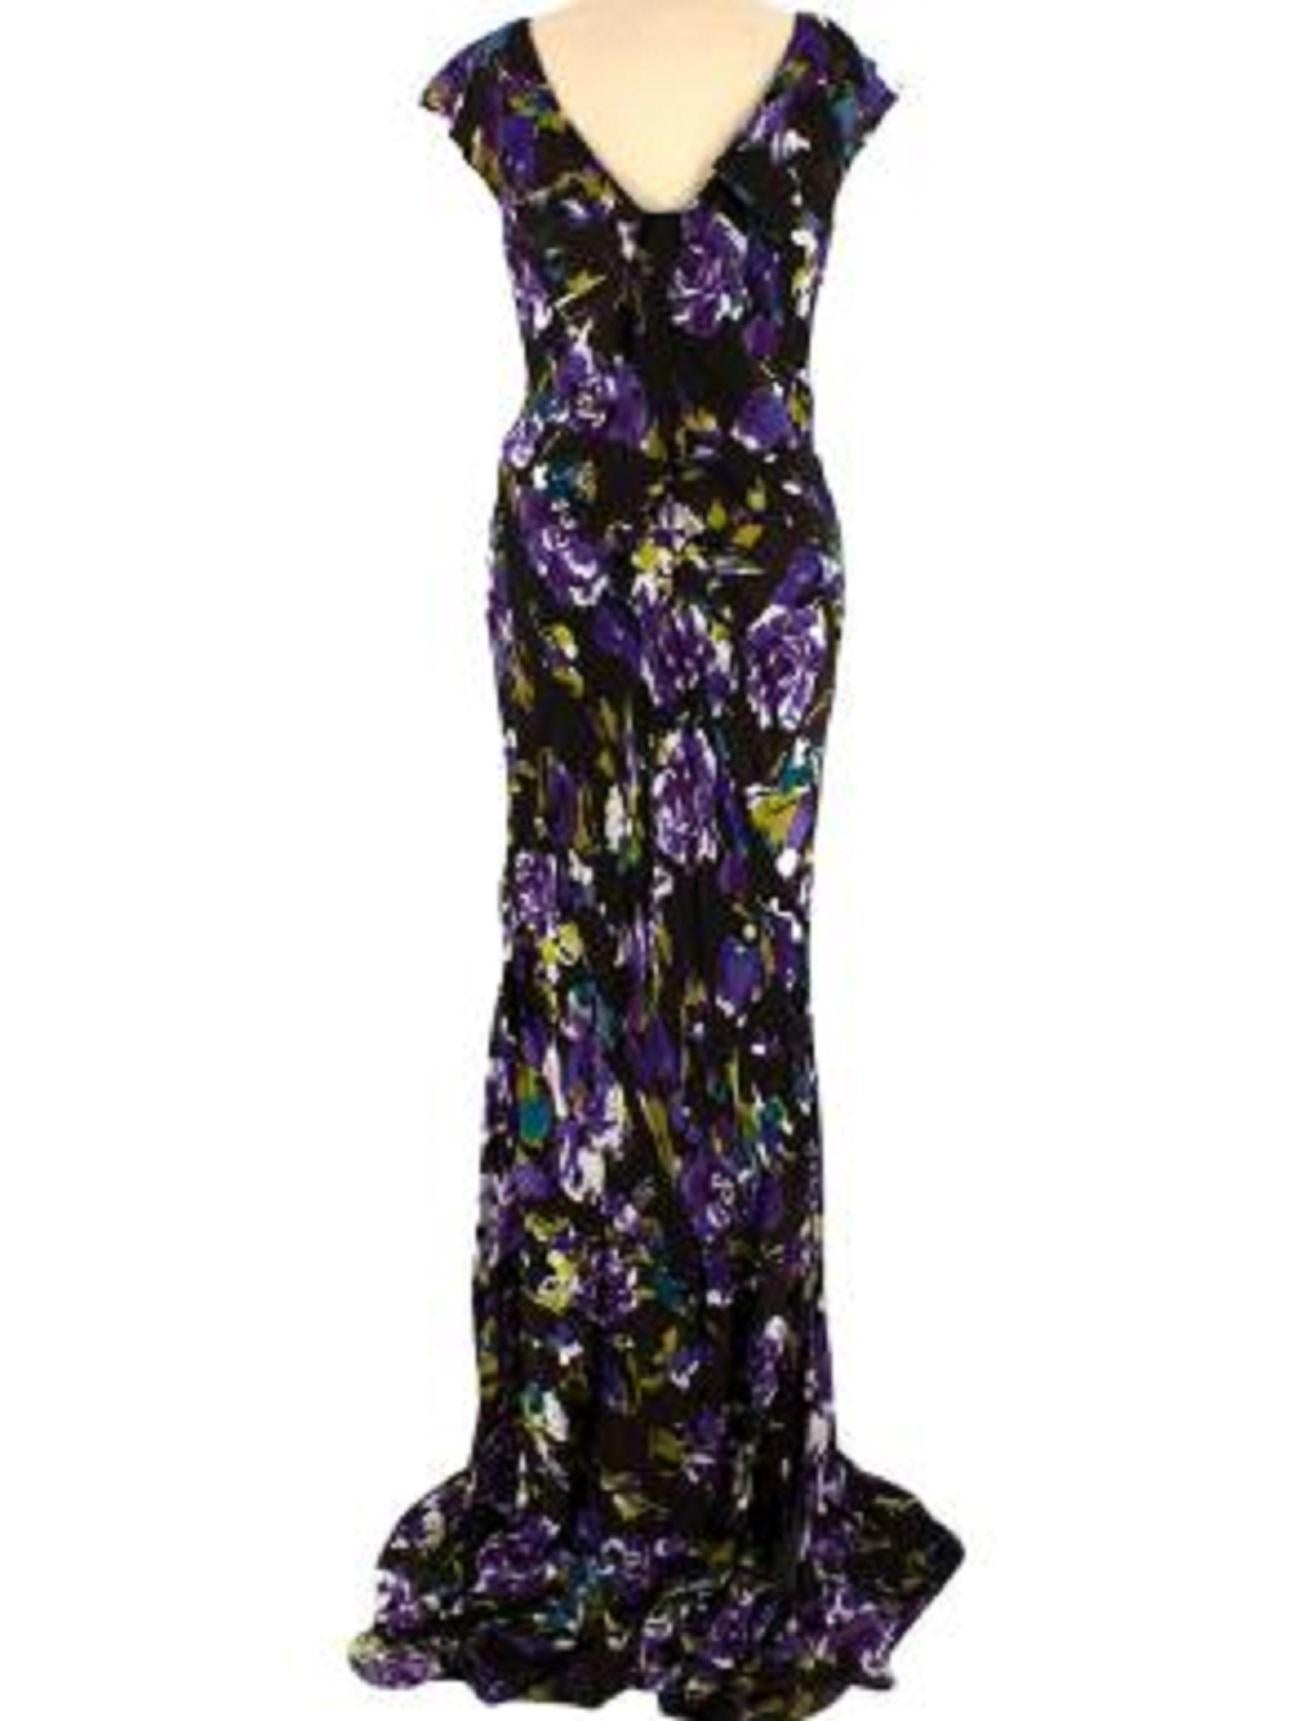 Oscar de la Renta Silk Floral Print Gown

- Silk gown in dark brown with purple, green and cream abstract floral print 
- Sleeveless with draped shoulder and neck panel giving a cowl neck and cap sleeve effect
- Long maxi length 
- Lightweight